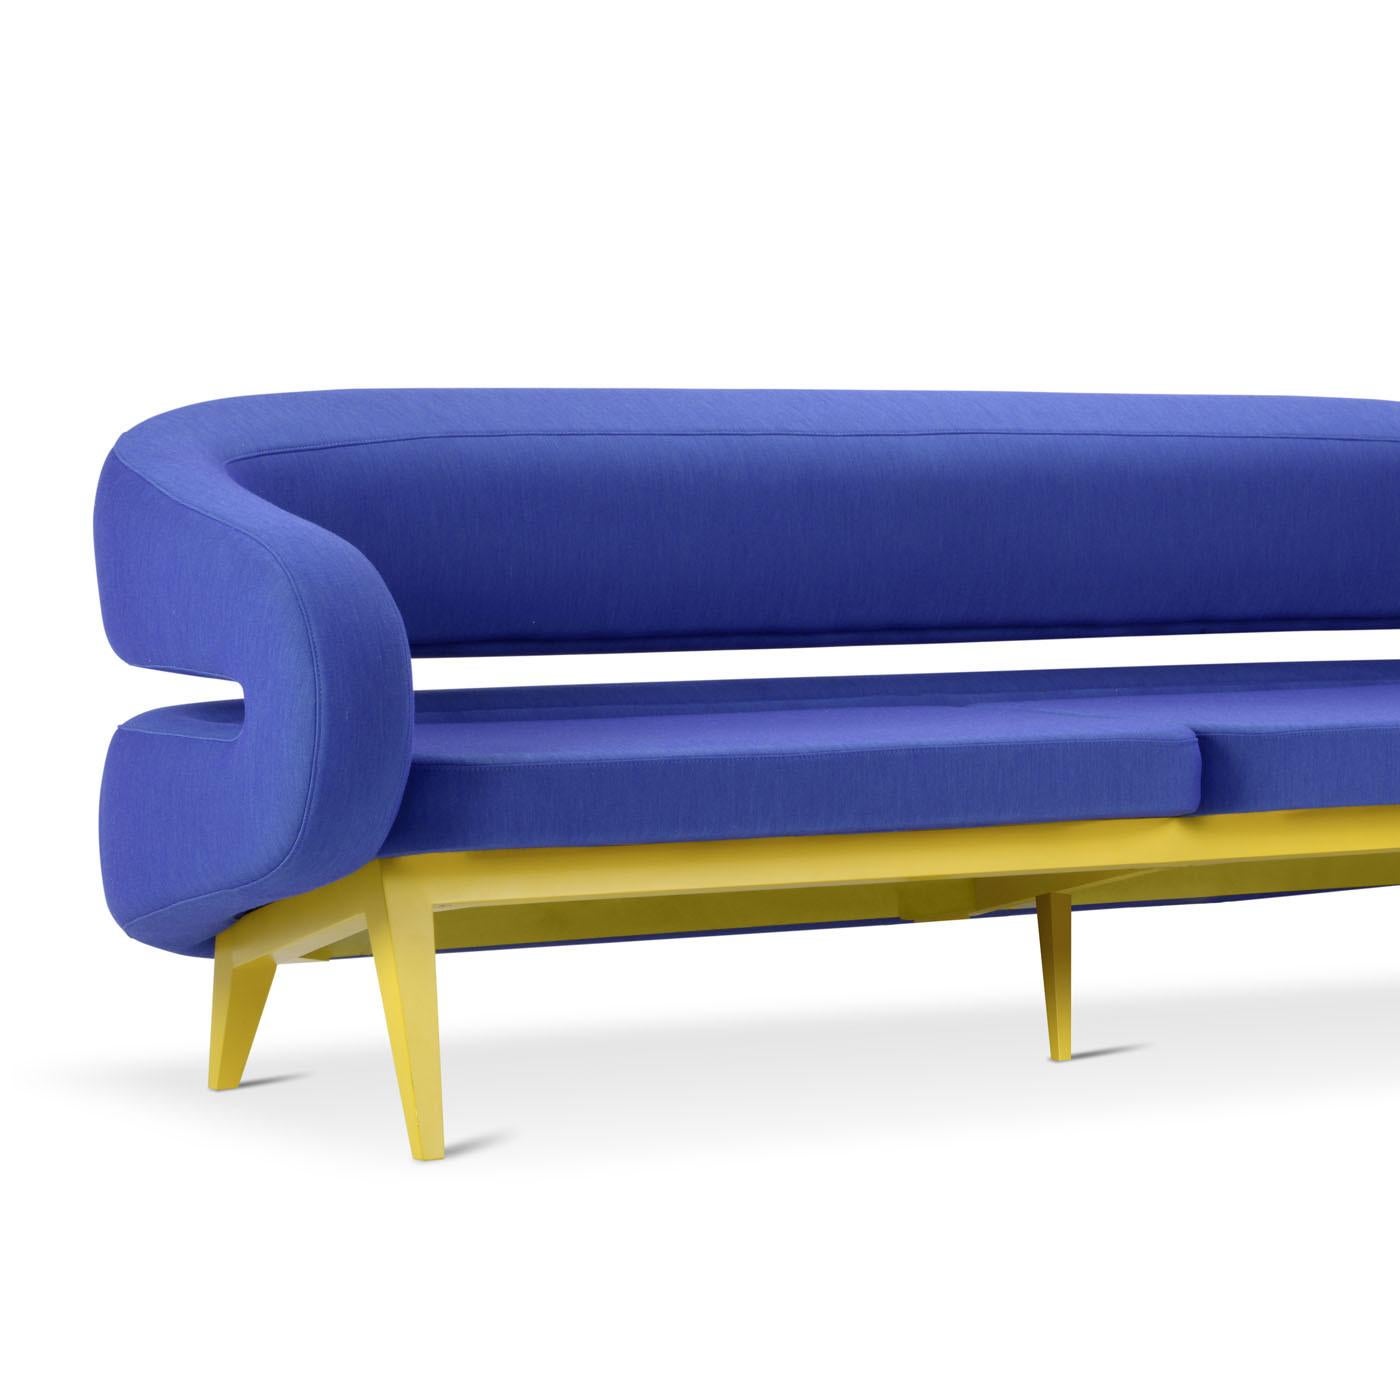 With its futuristic design, this sofa features a base made from beech wood and available in various finishes. The sofa will suit any need with its non-deformable polyurethane foam padded seat in various densities. This sofa offers a choice of colors